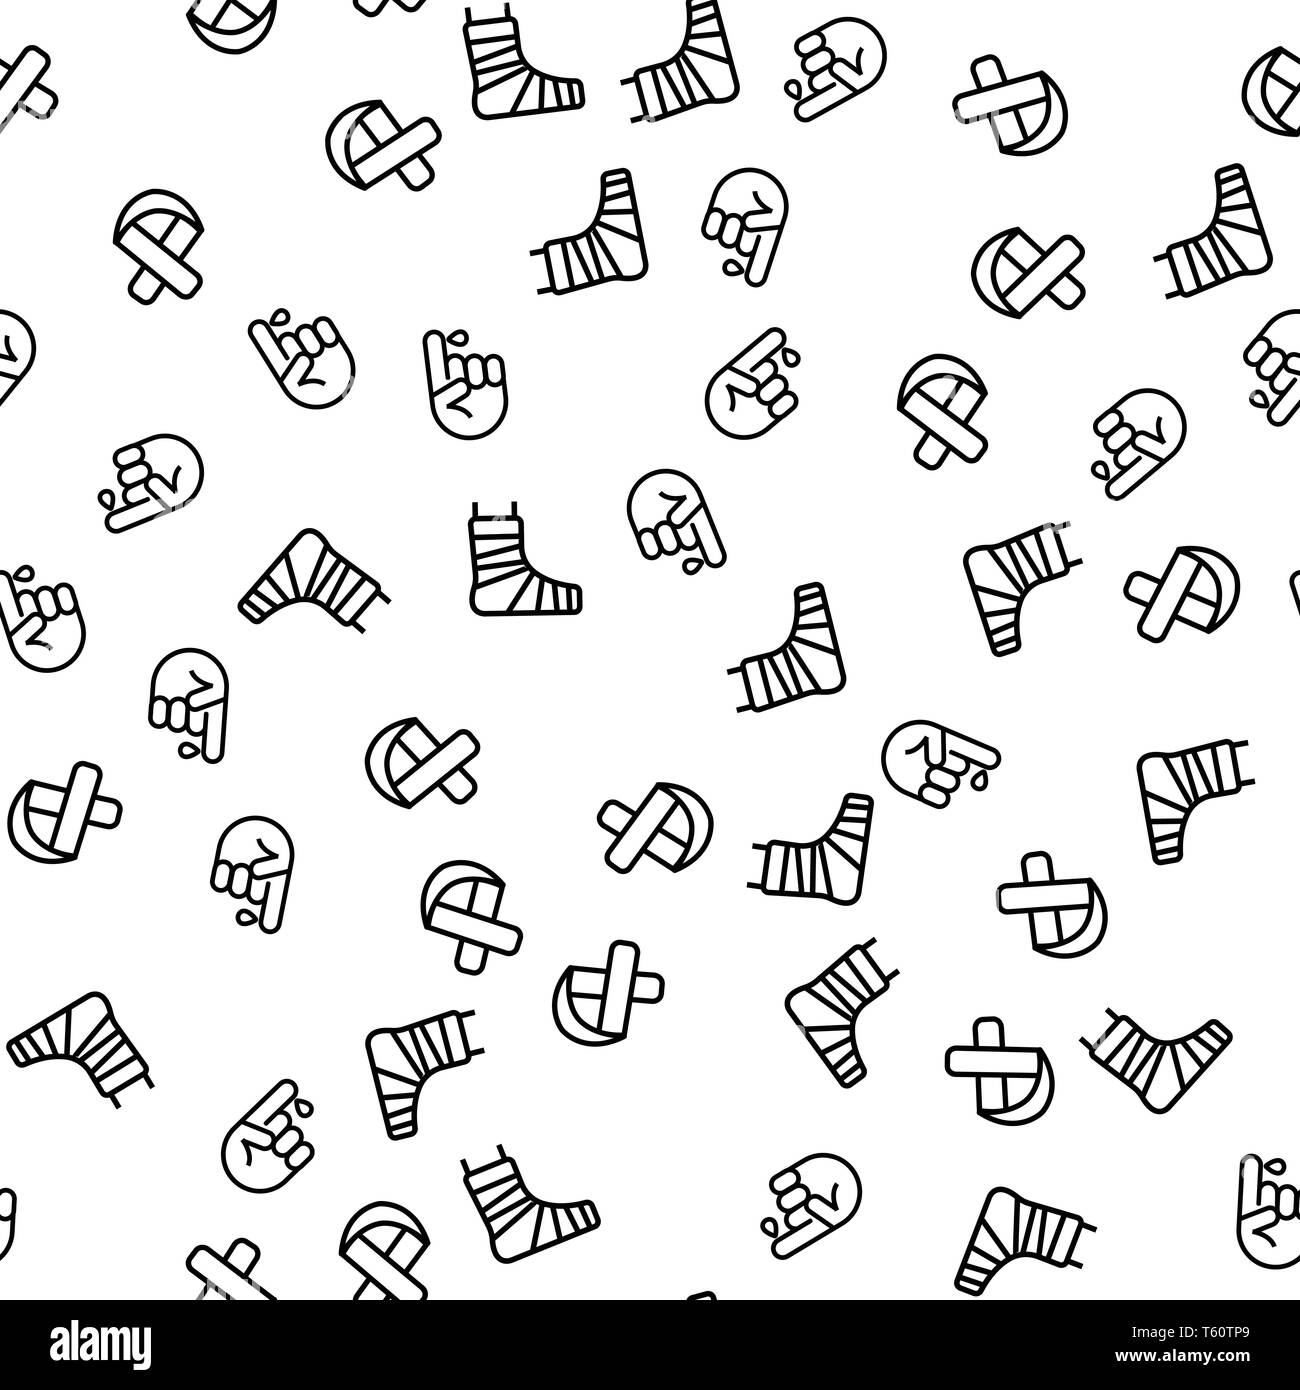 Human Injury And Treatment Seamless Pattern Vector Stock Vector